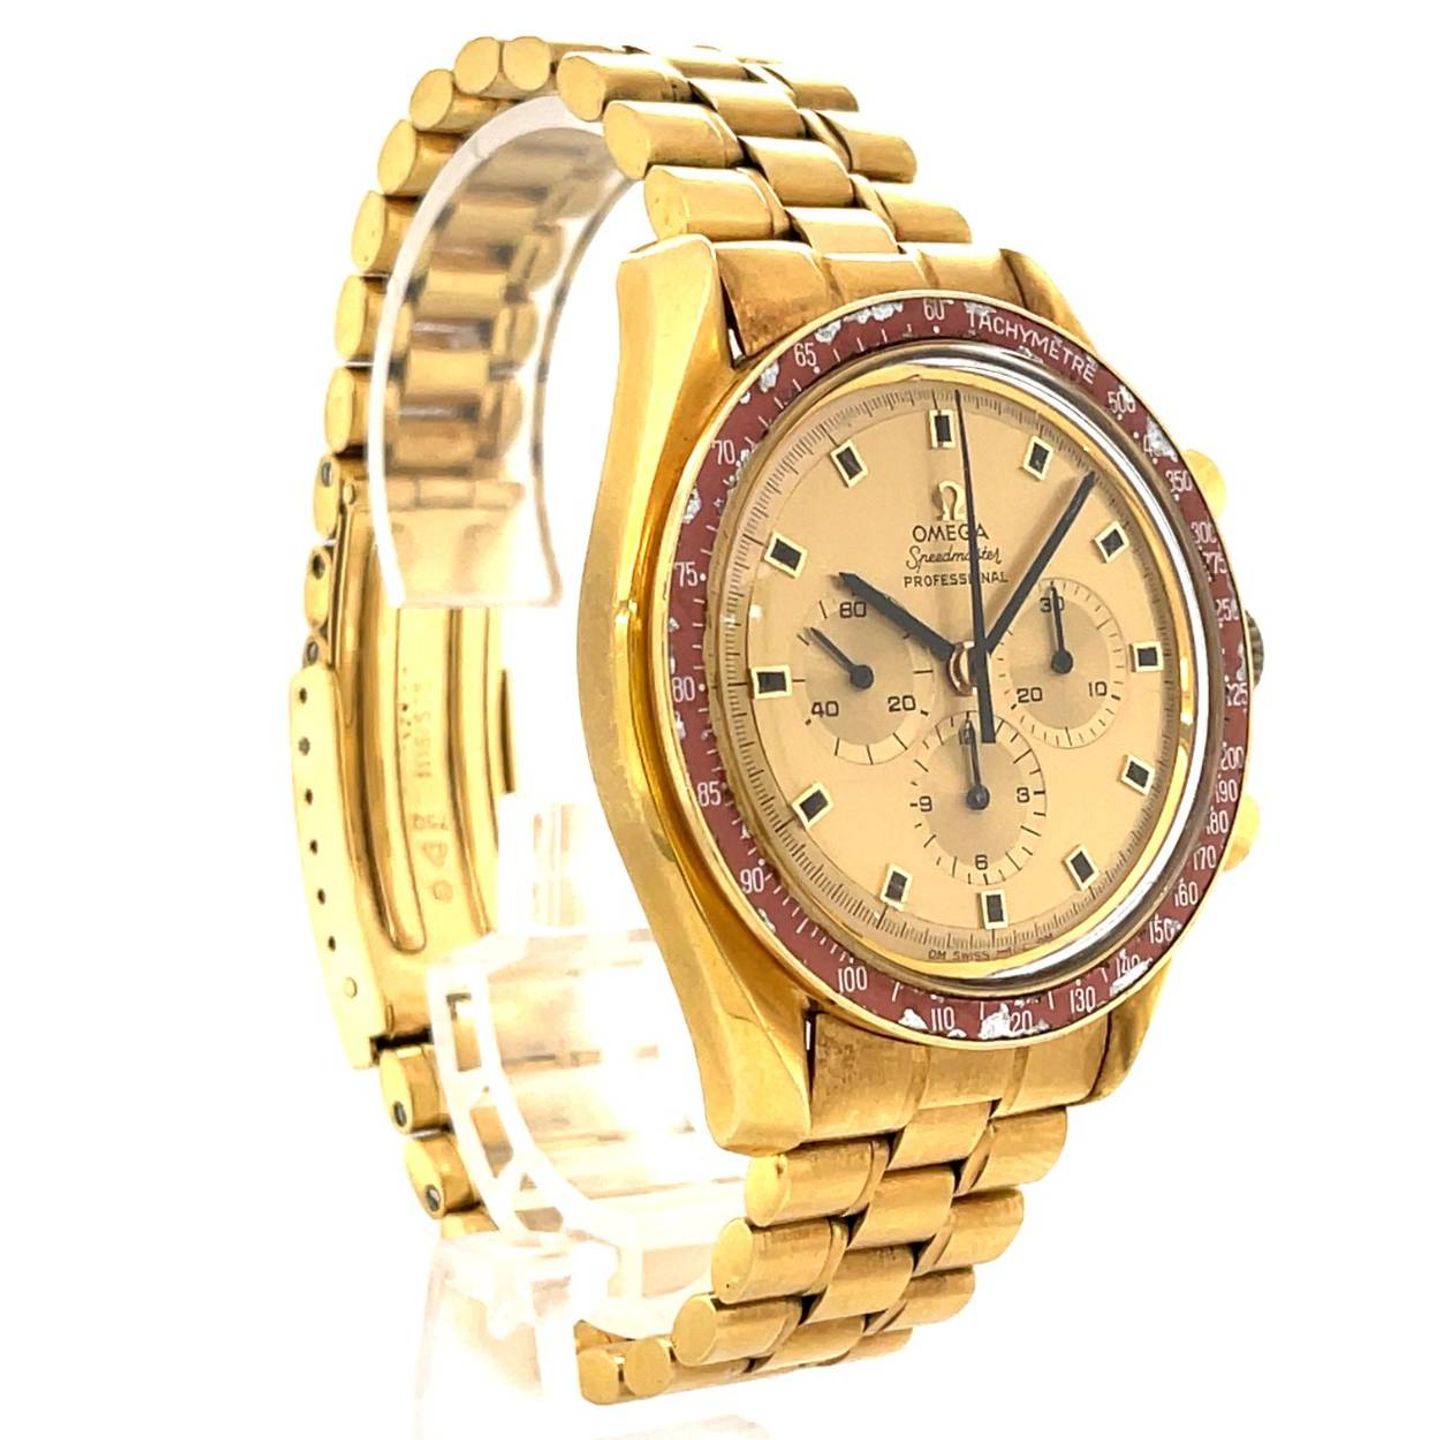 Omega Speedmaster Professional Moonwatch 145.022 (Unknown (random serial)) - Gold dial 42 mm Yellow Gold case (5/5)